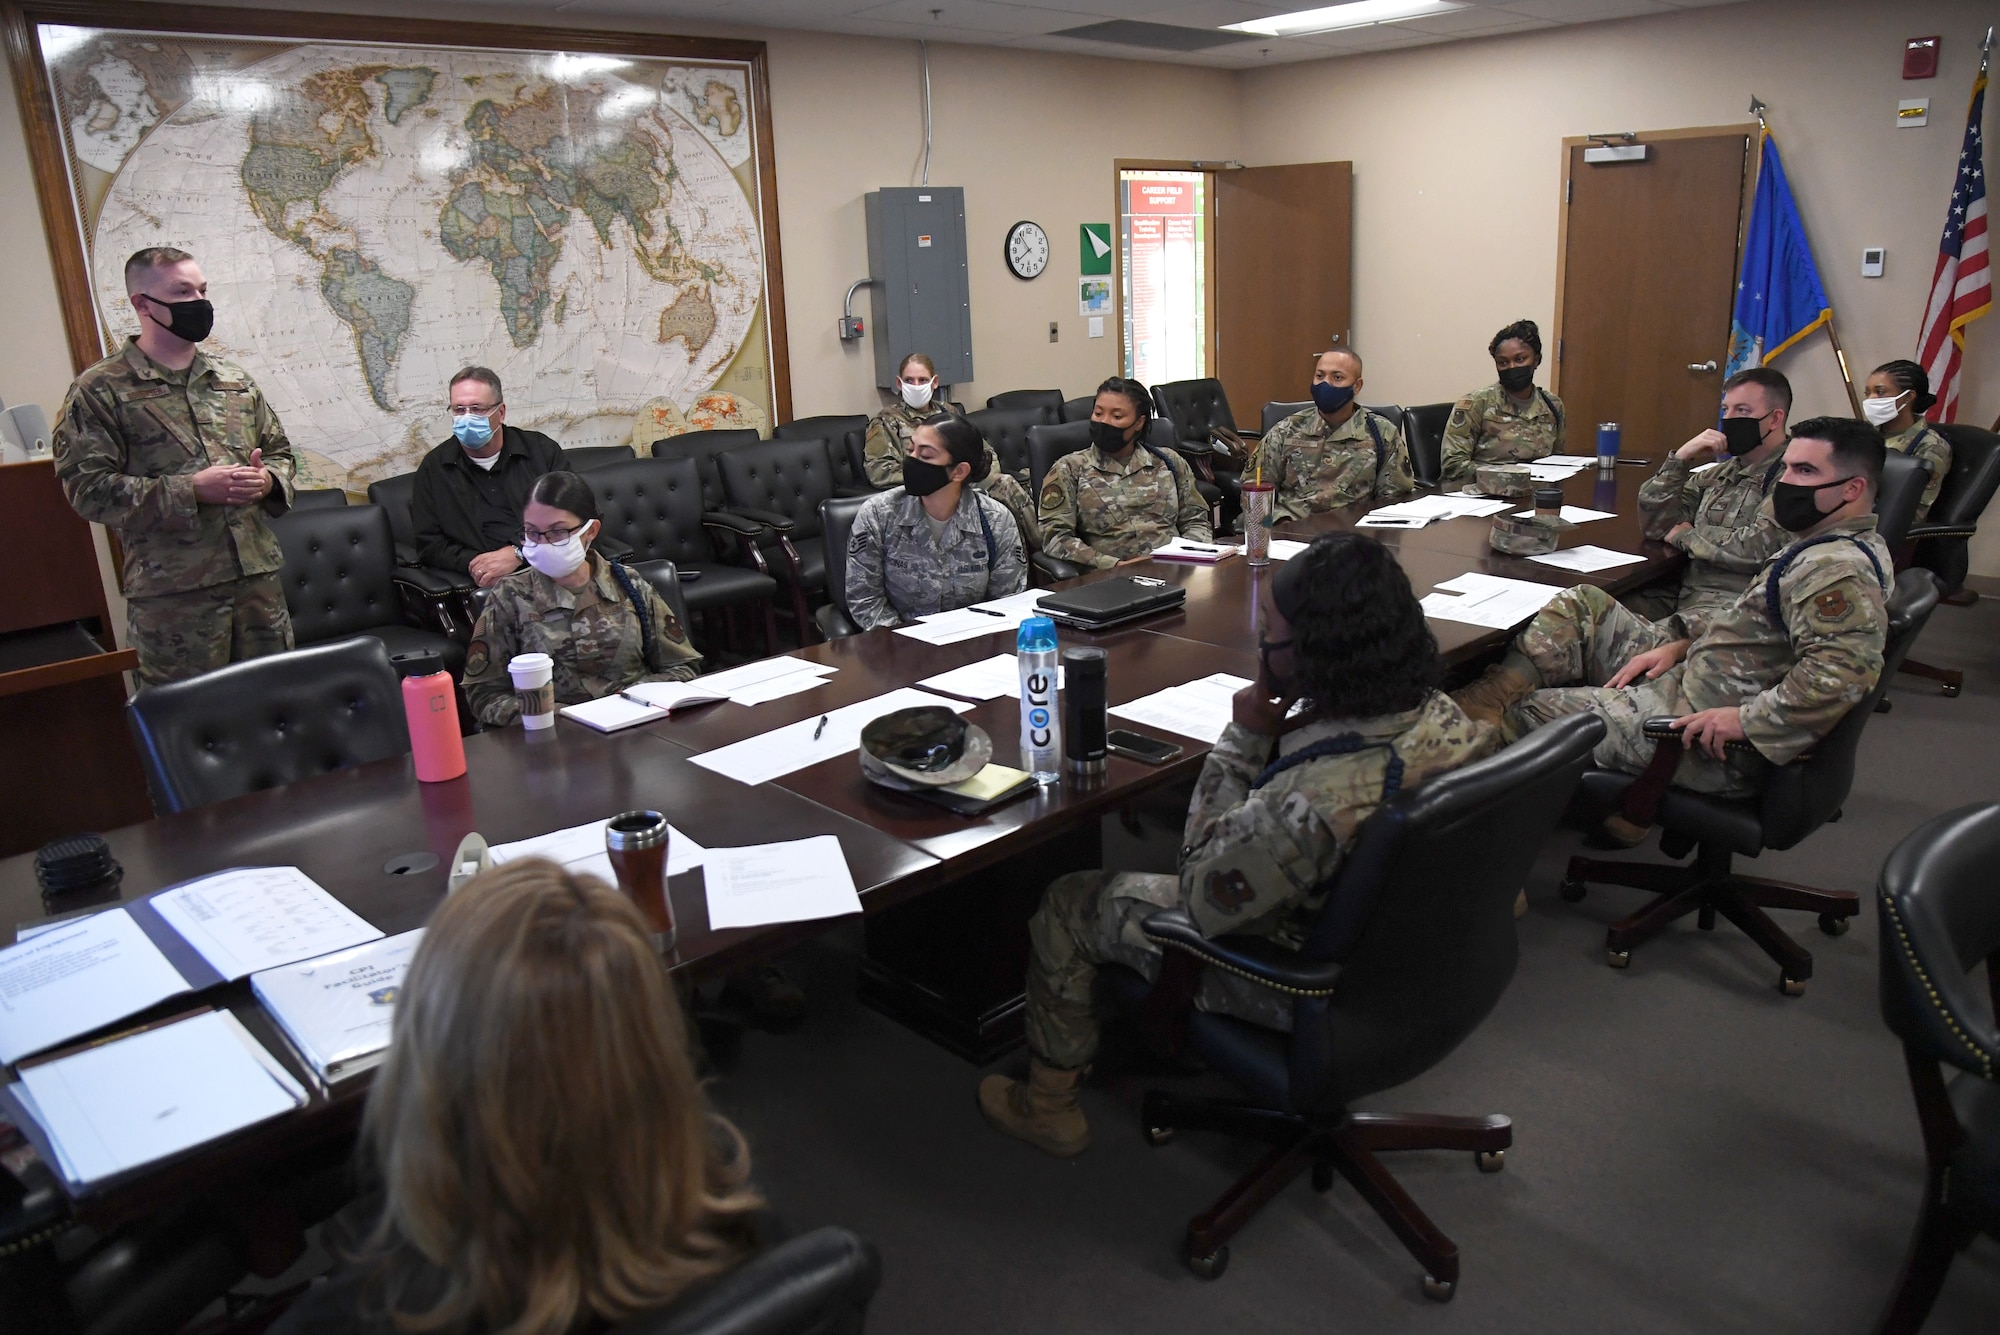 Members of the 81st Training Group attend the Continuous Process Improvement workshop inside Matero Hall at Keesler Air Force Base, Mississippi, October 1, 2020. The workshop included 81st TRG military training instructors discussing ways of improvement for current procedures being followed by focusing on maximizing value, minimizing waste, sharing best practices and standardizing across the 81st TRG whenever and where ever possible. (U.S. Air Force photo by Kemberly Groue)